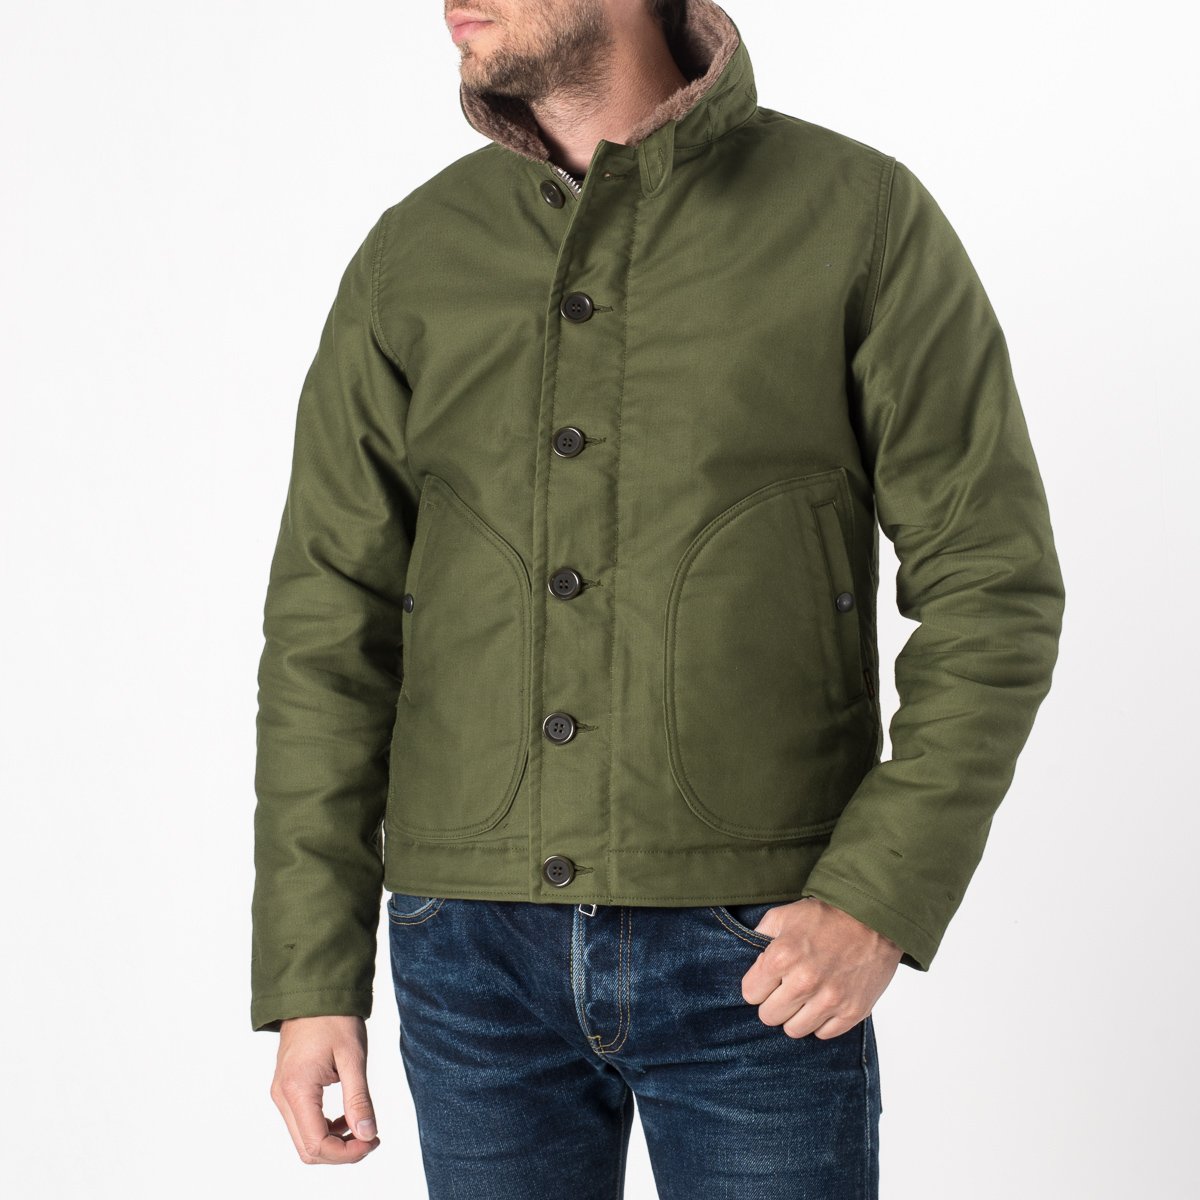 Iron Heart Whipcord N1 Deck Jacket - Olive